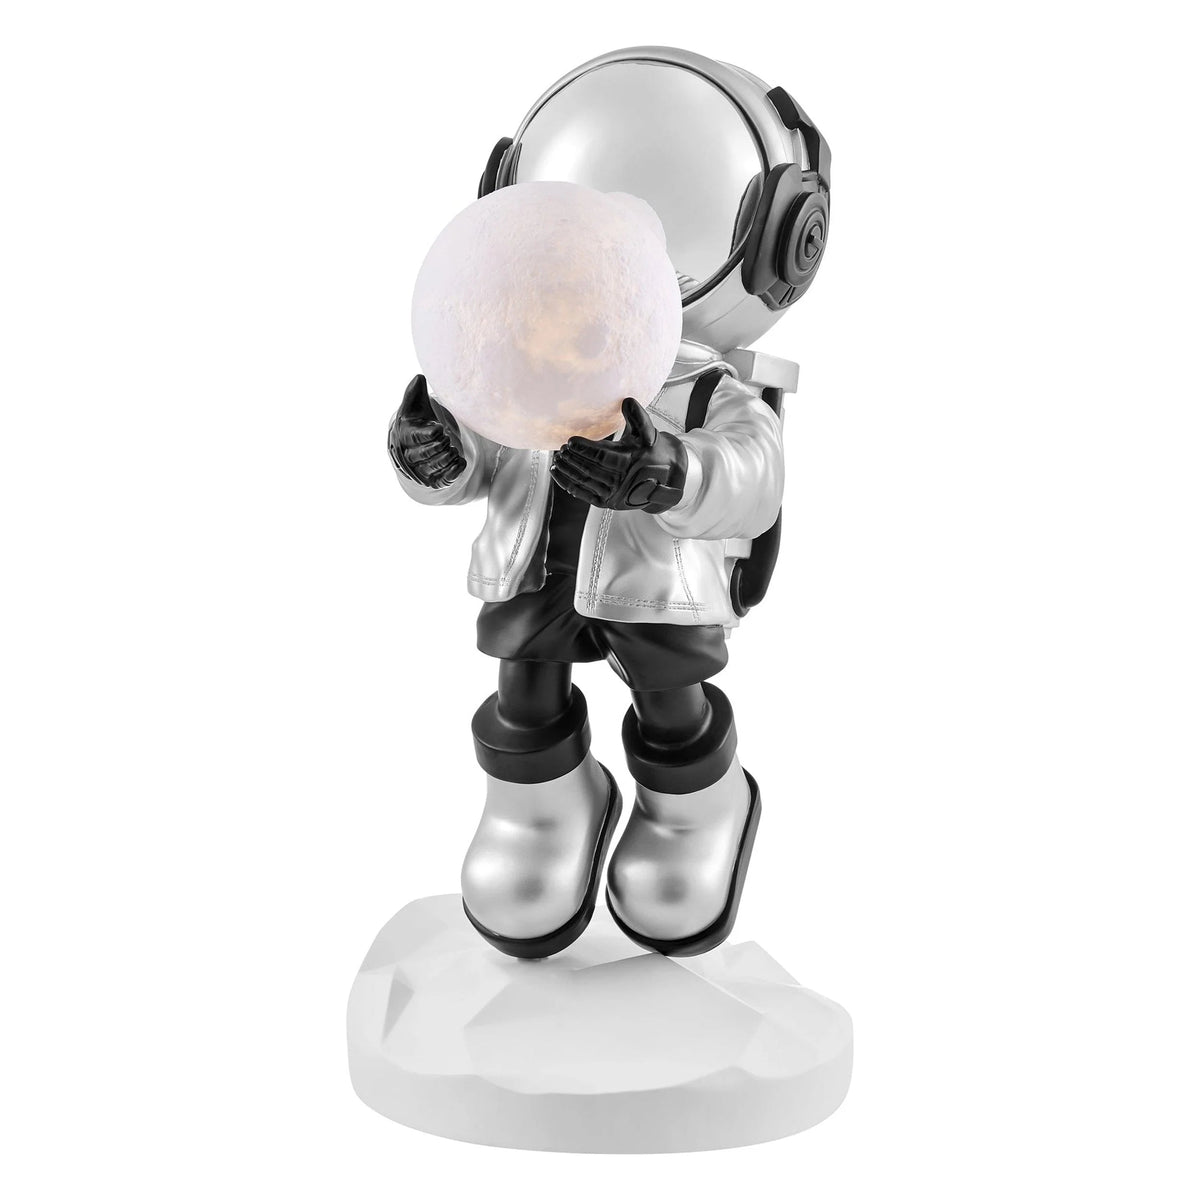 Black & Silver Hadfield Astronaut Sculpture with Lighted Moon